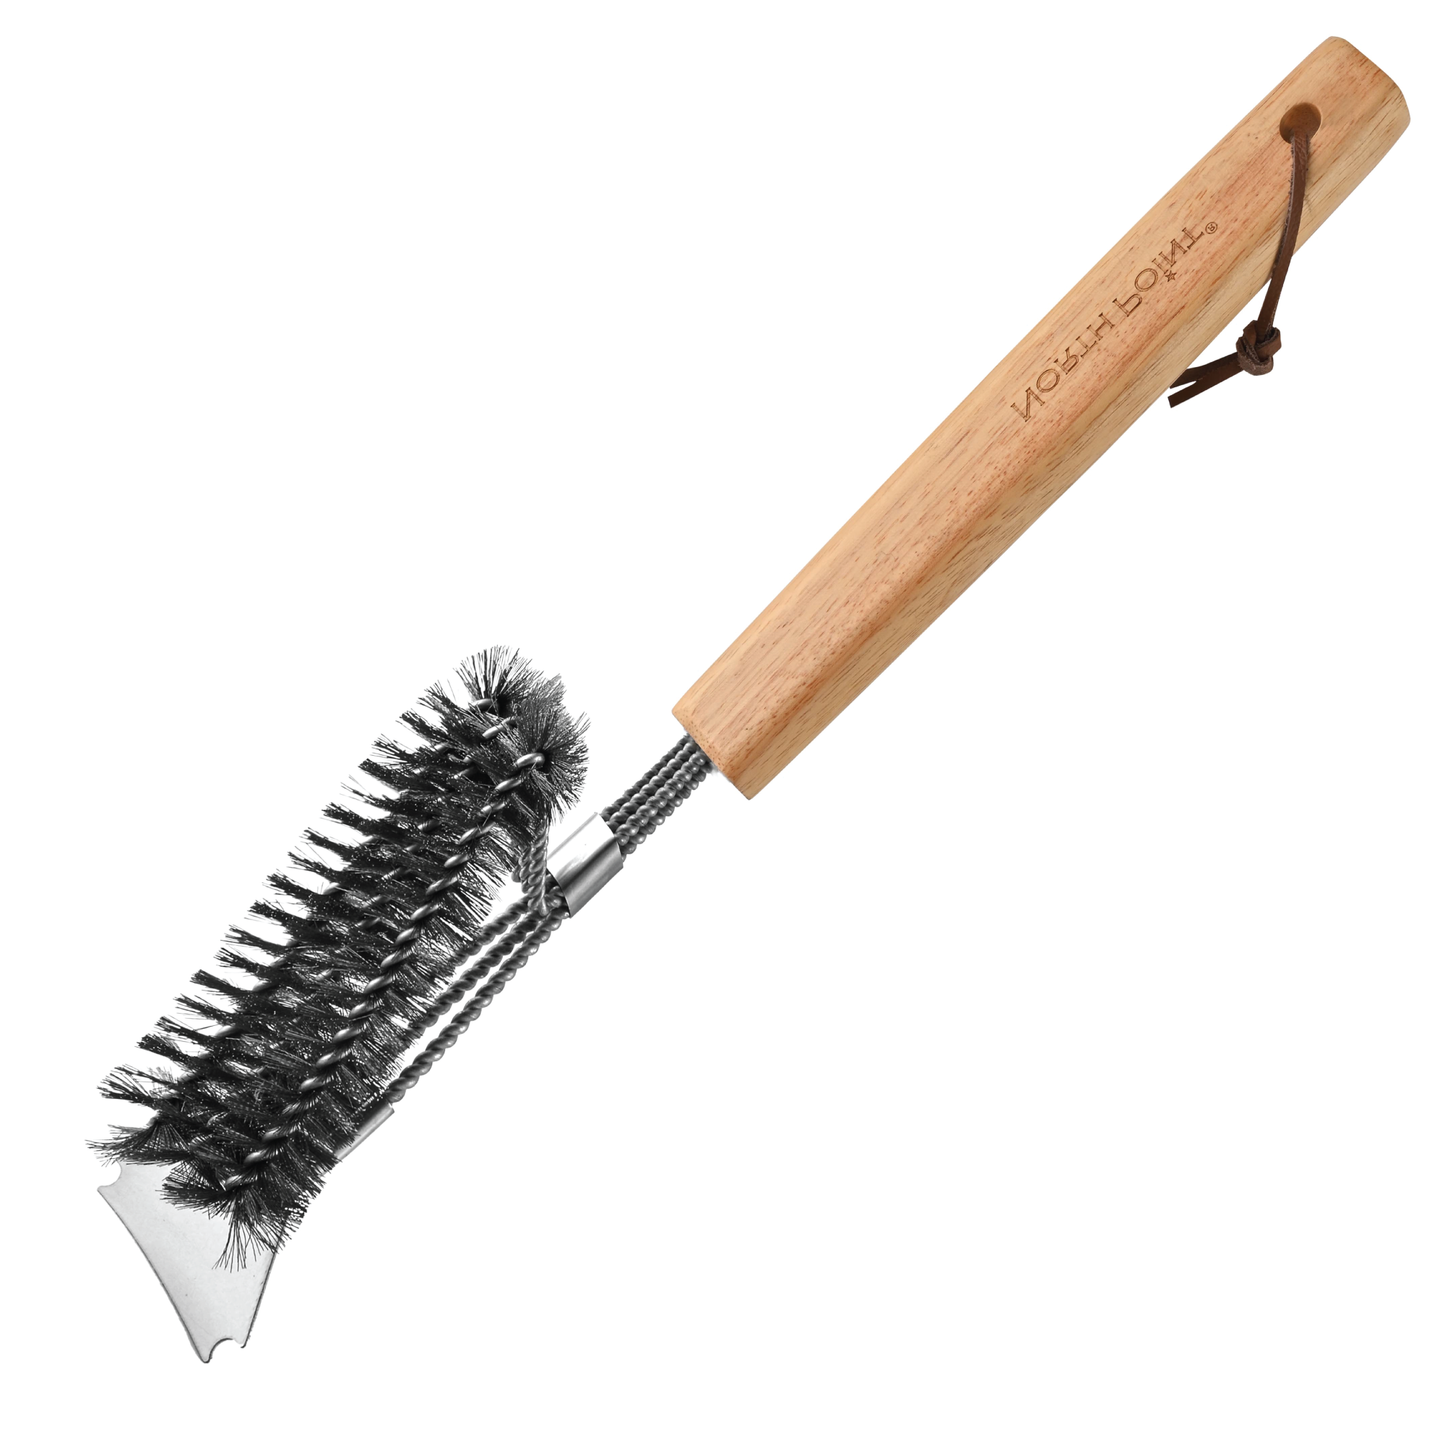 North Point® Cleaning Brush with wooden handle